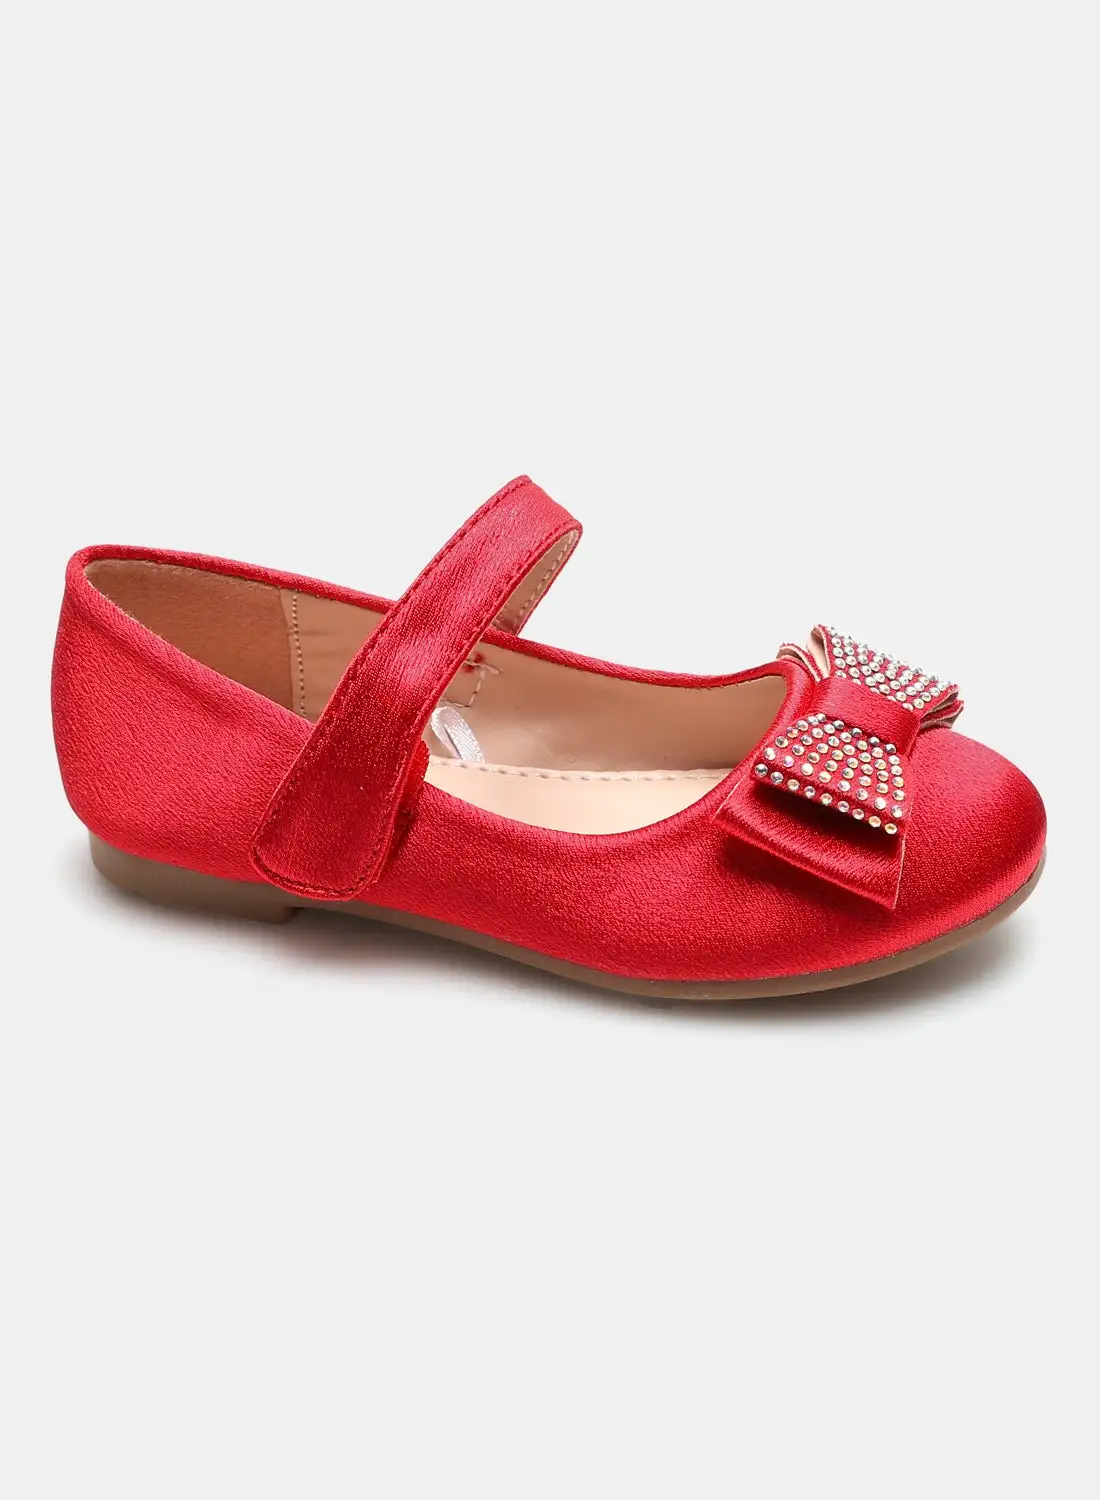 NEON Girls Casual Strapped Ballerinas Red